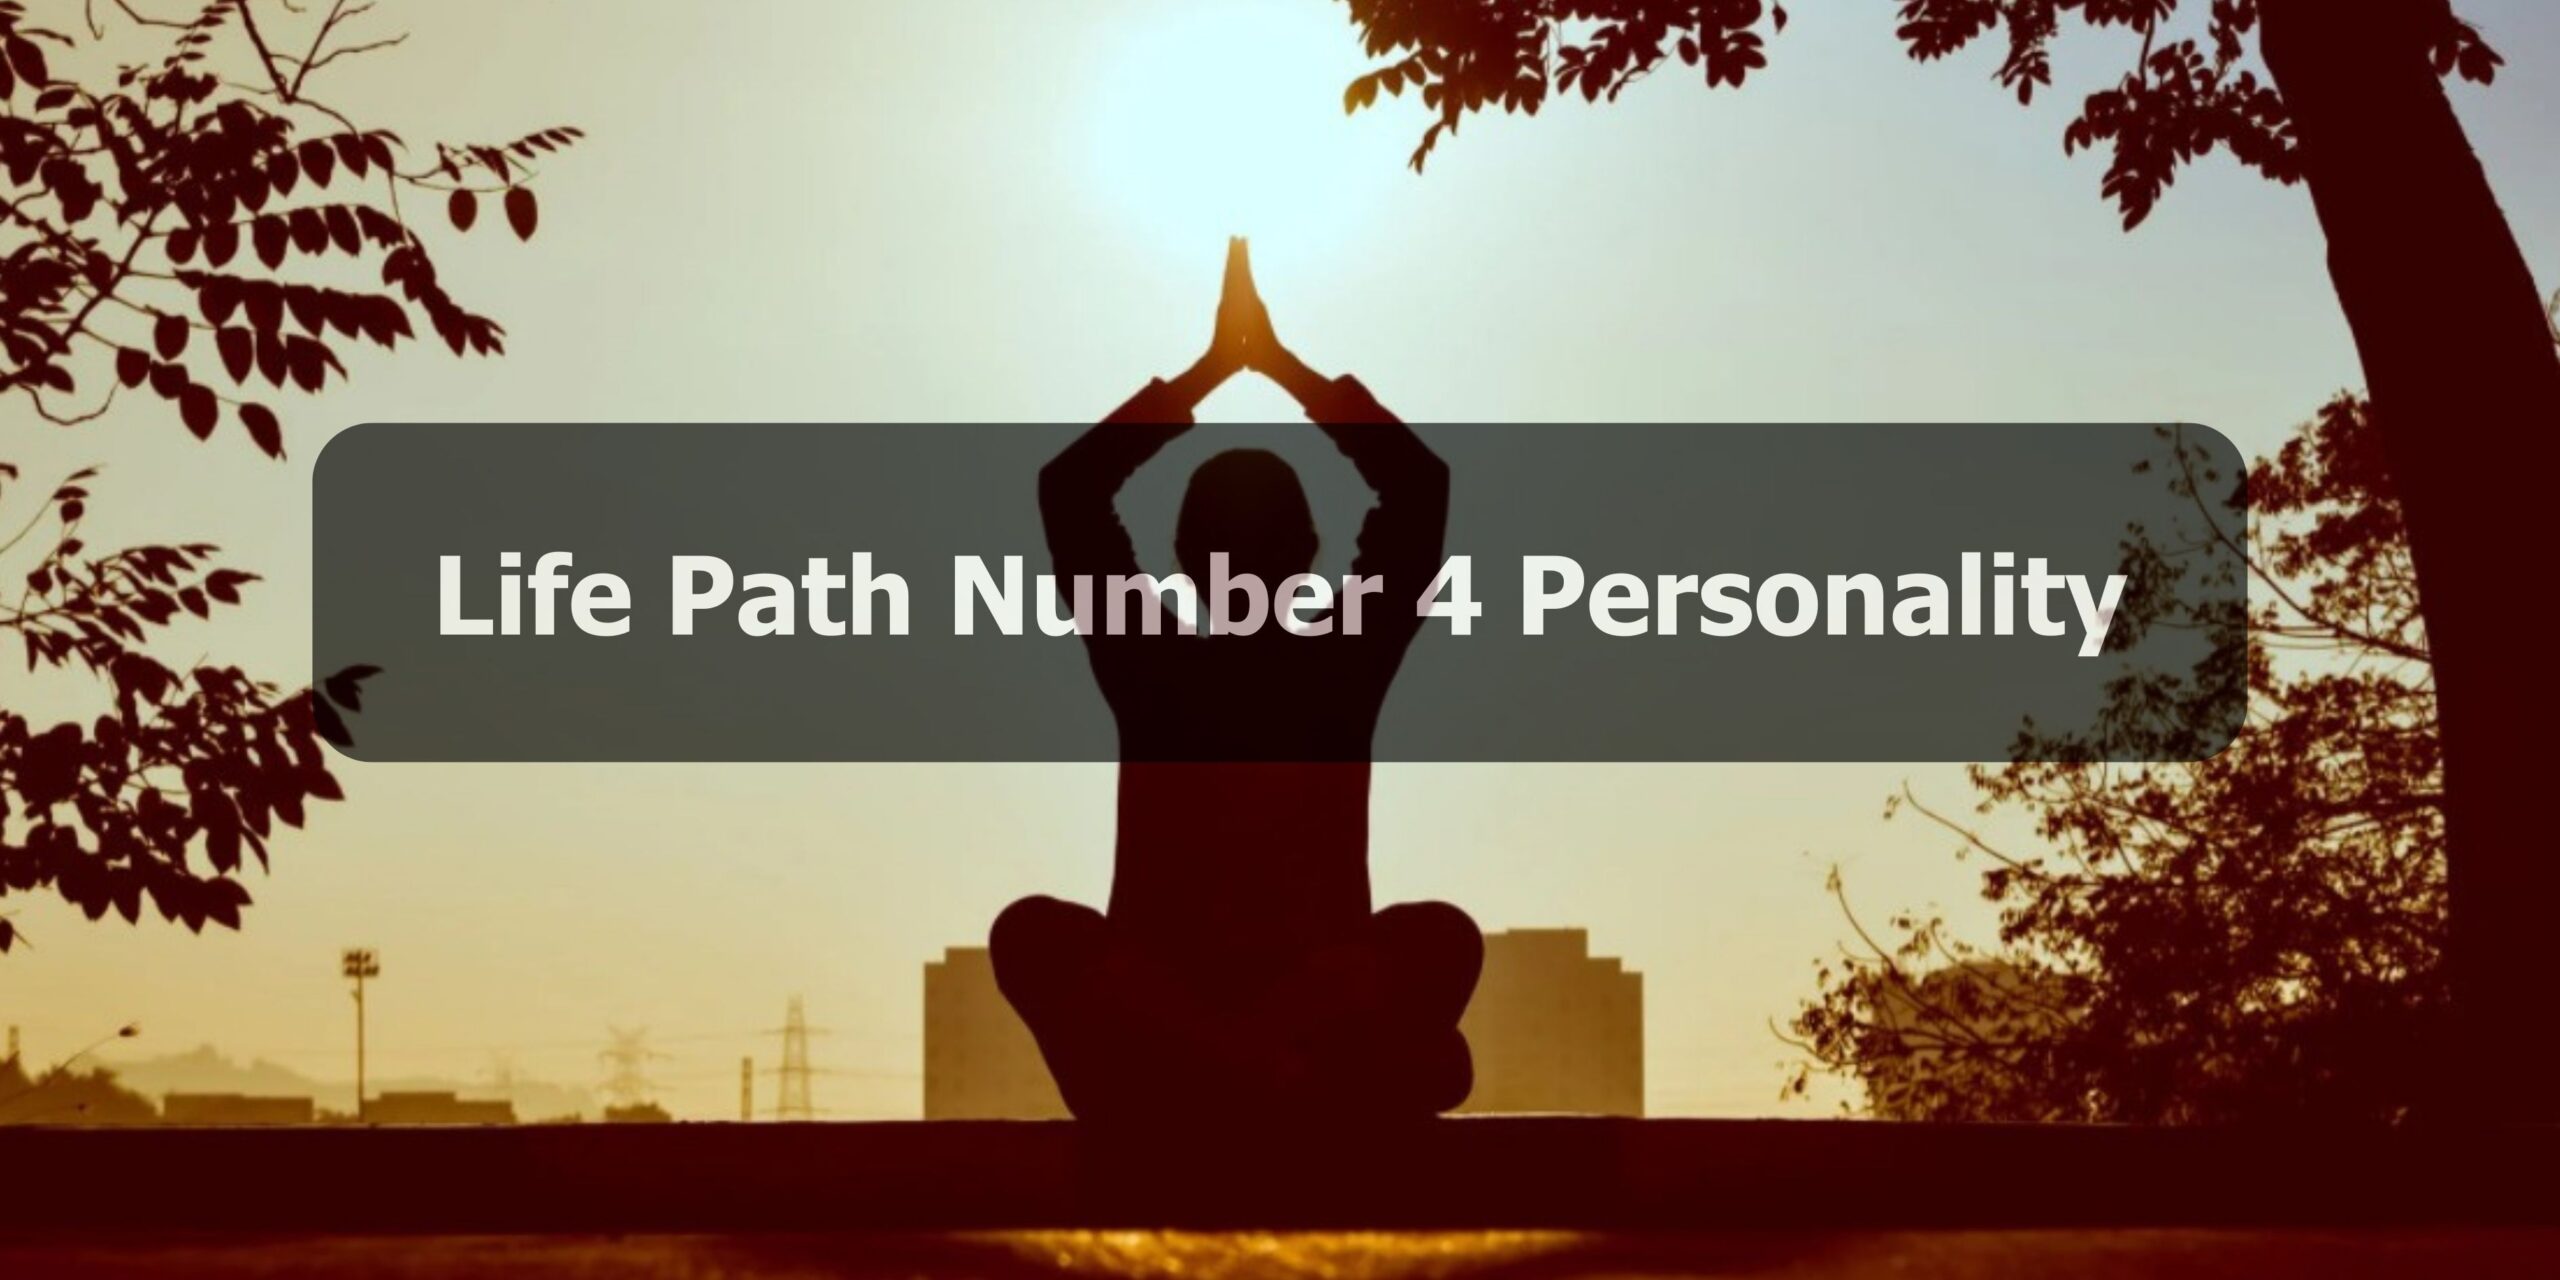 Life Path Number 4 Personality